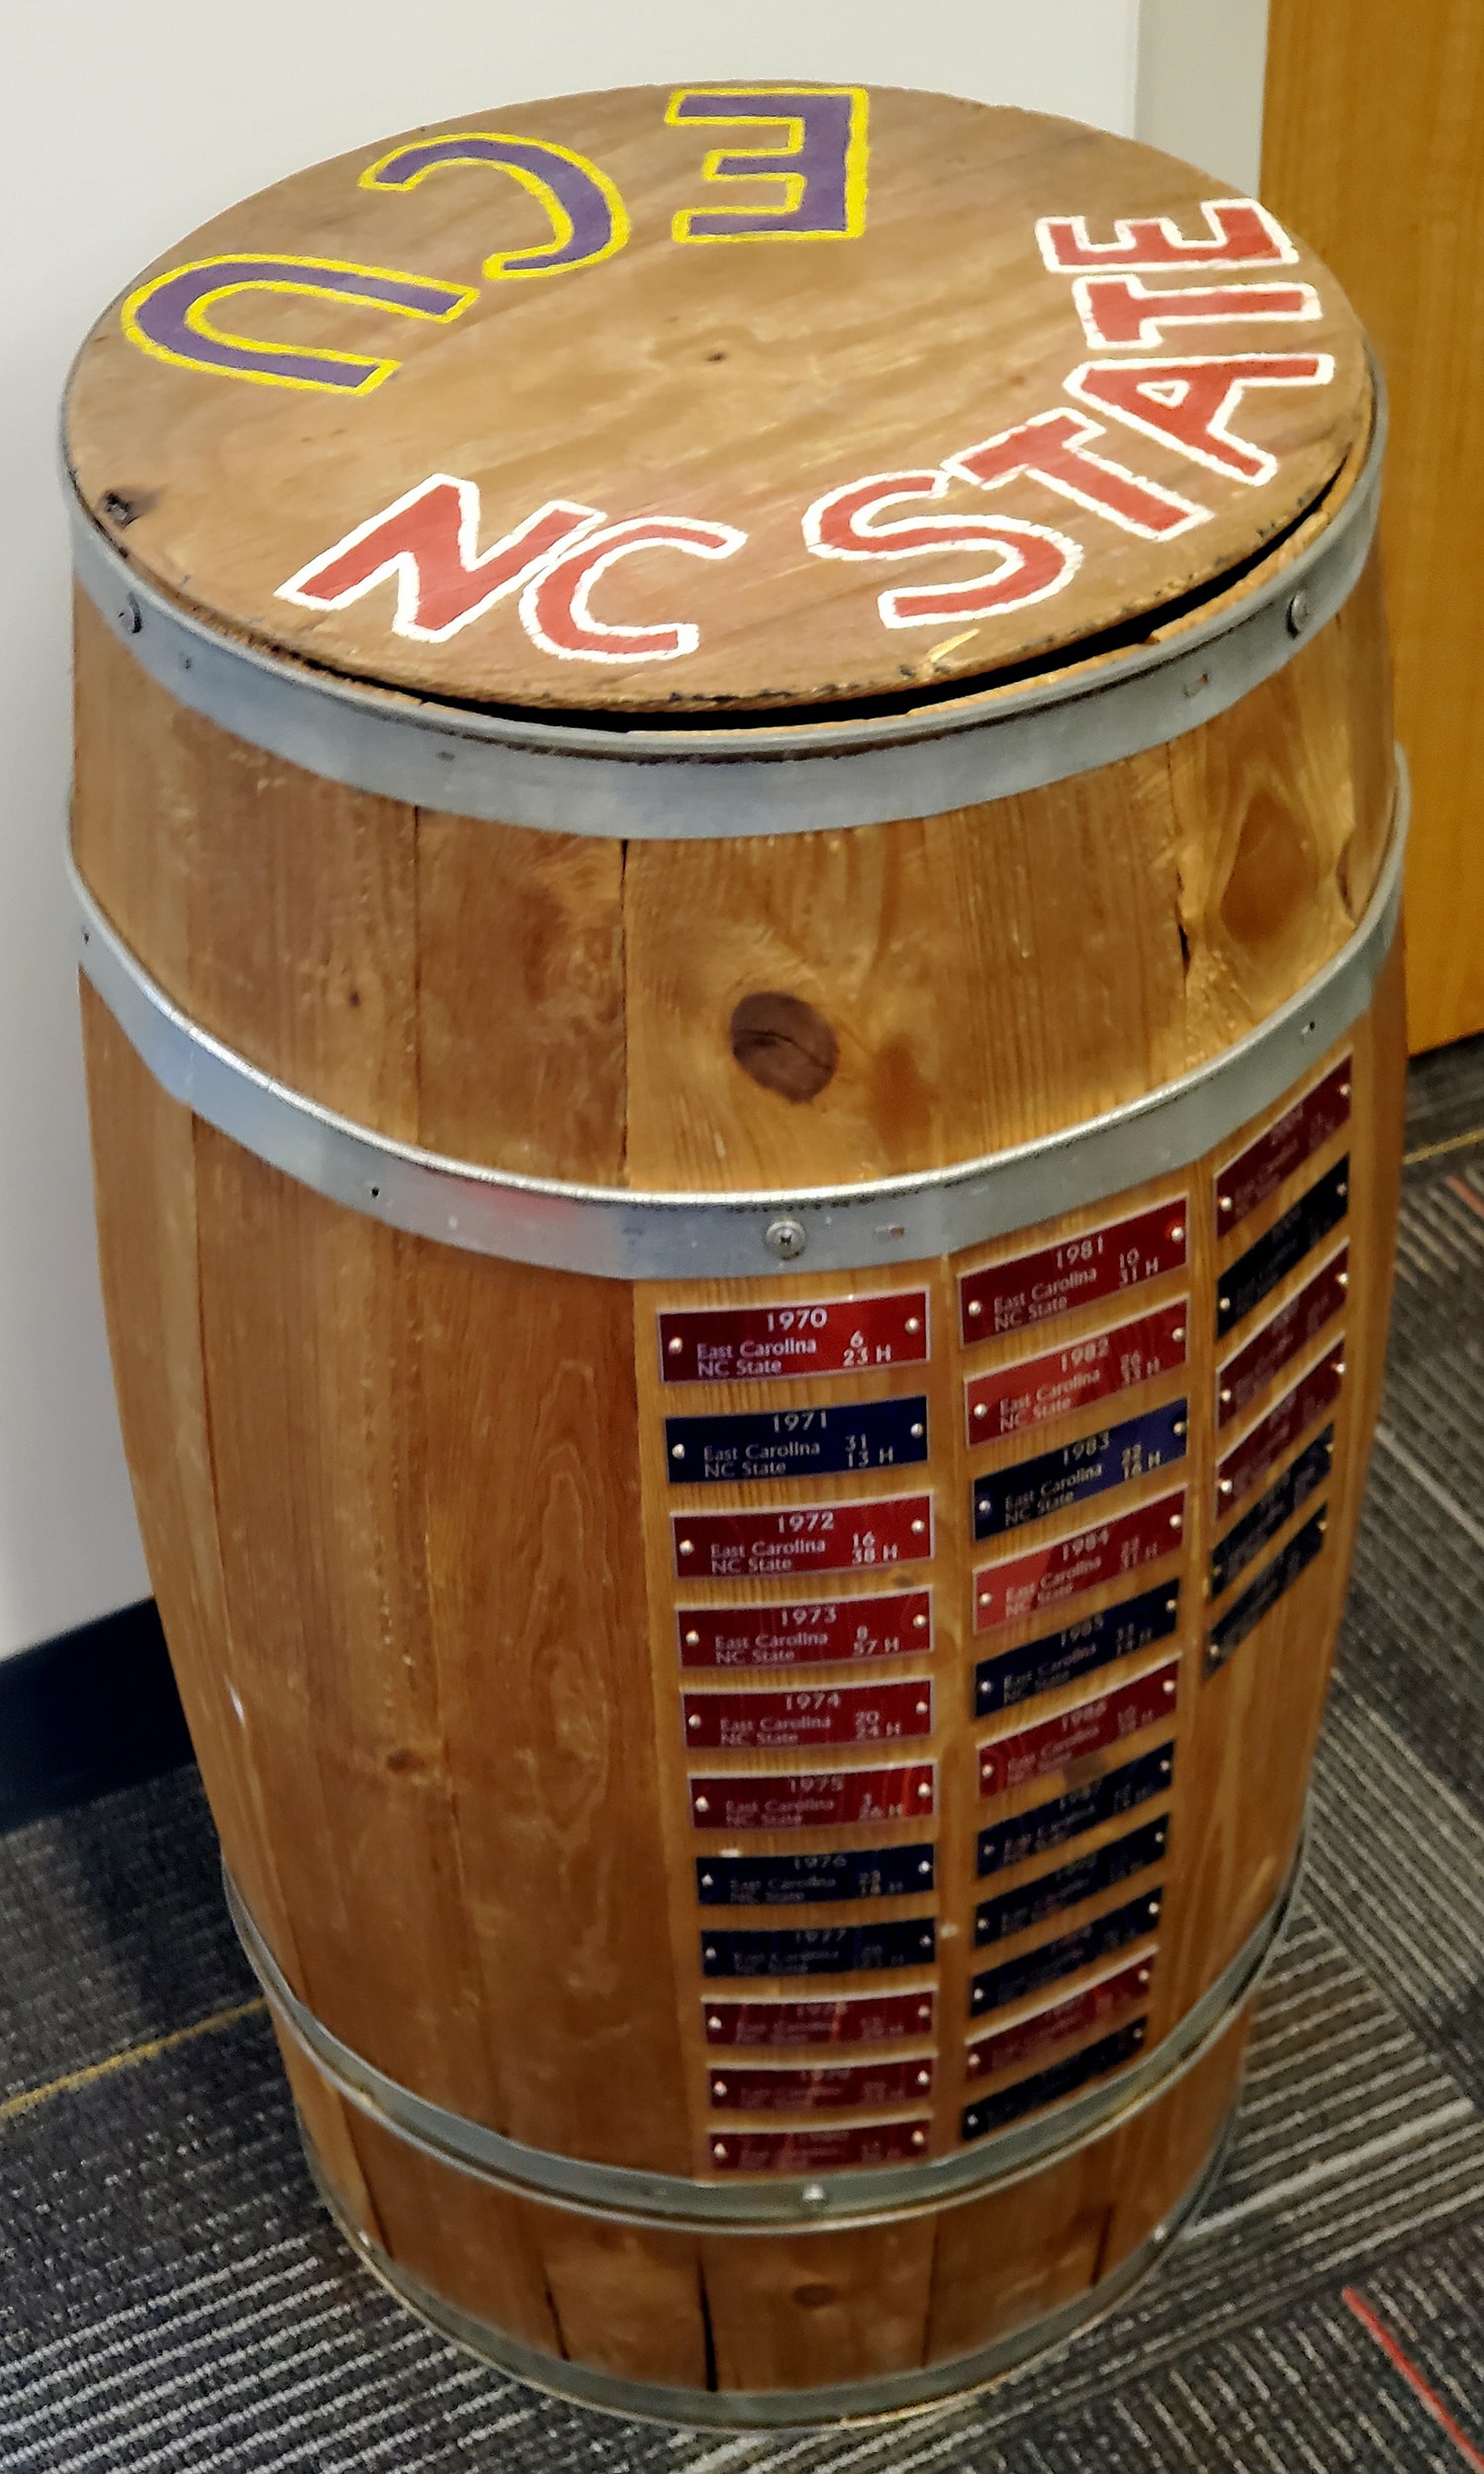 The Victory Barrel in a hallway in Talley Student Union.